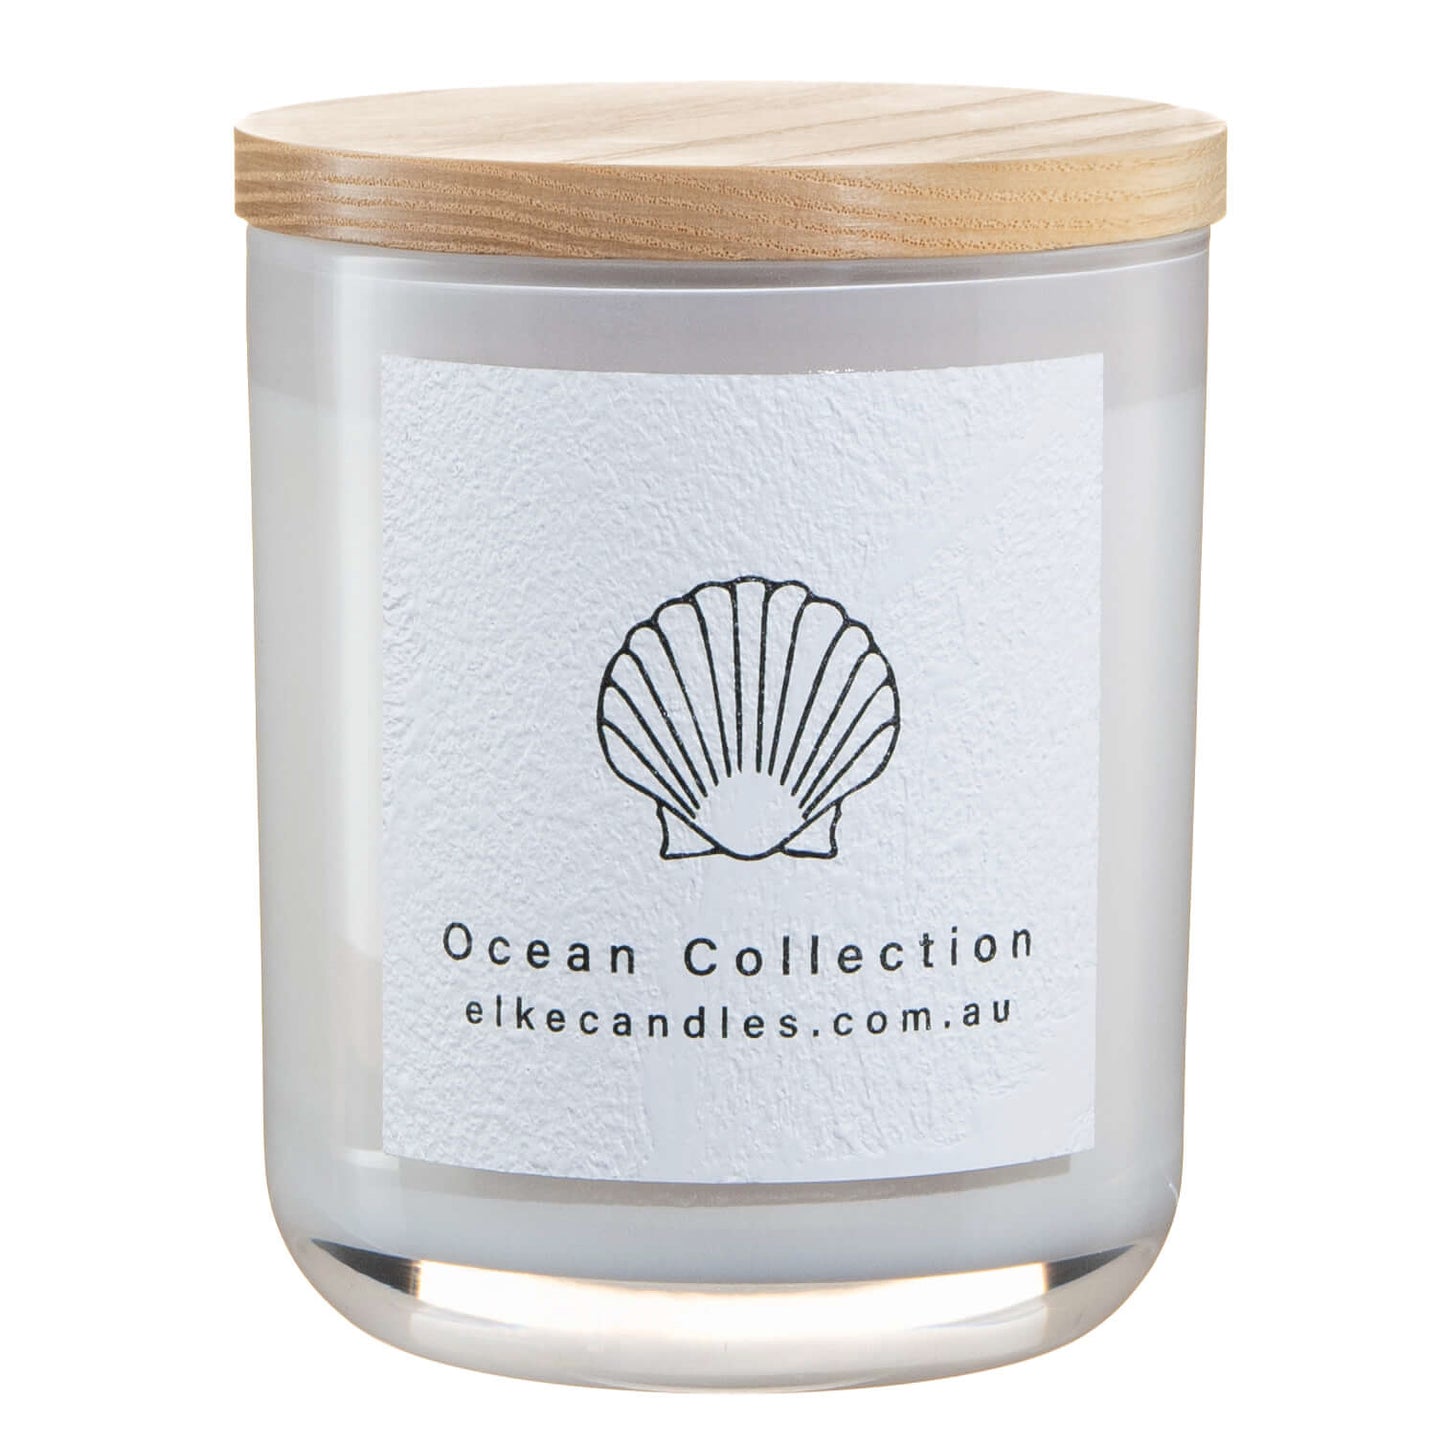 Ocean Collection Soy Candle